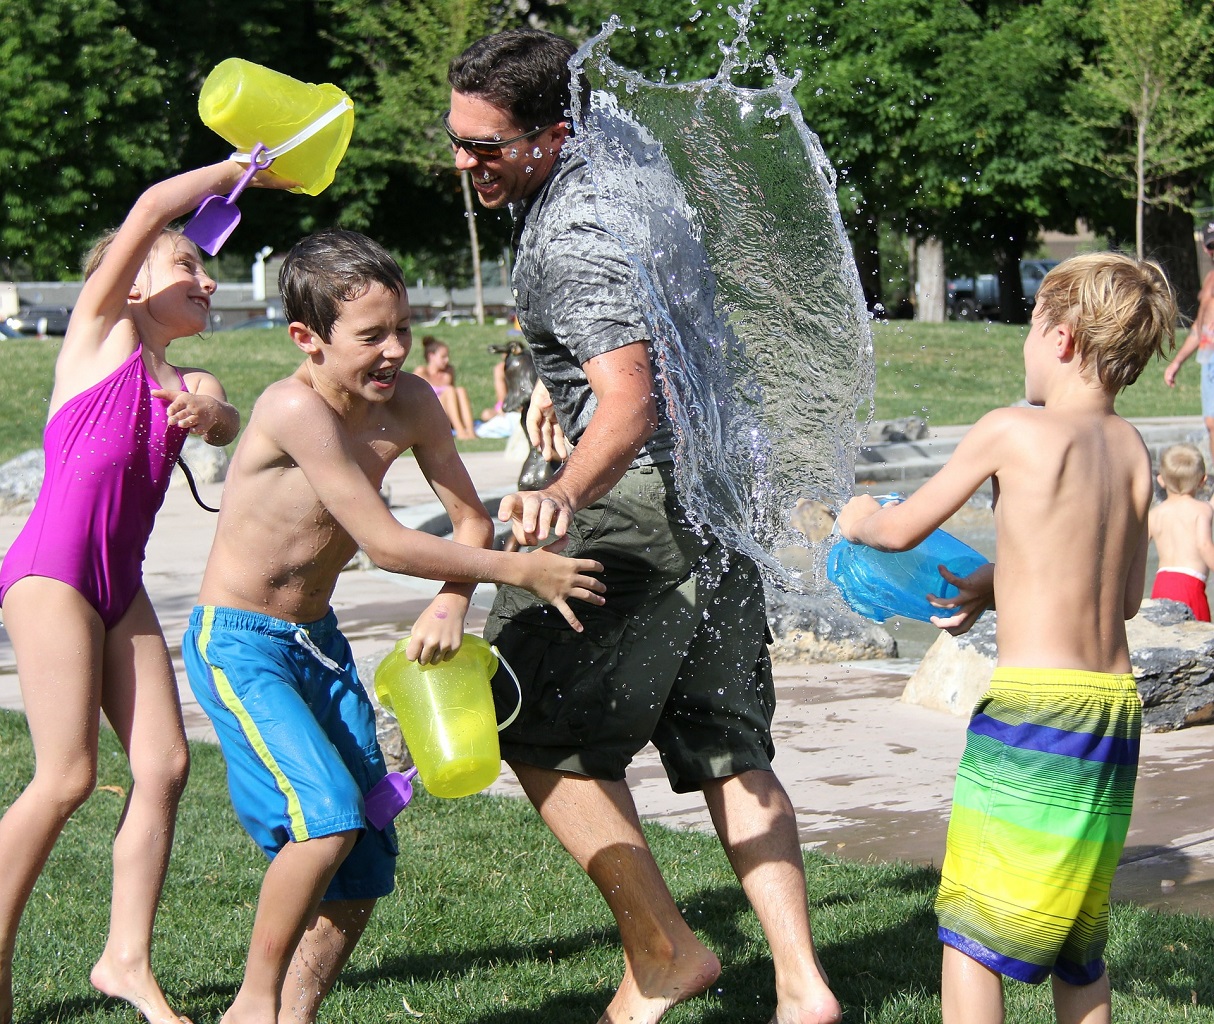 Adult and three kids playing with buckets of water